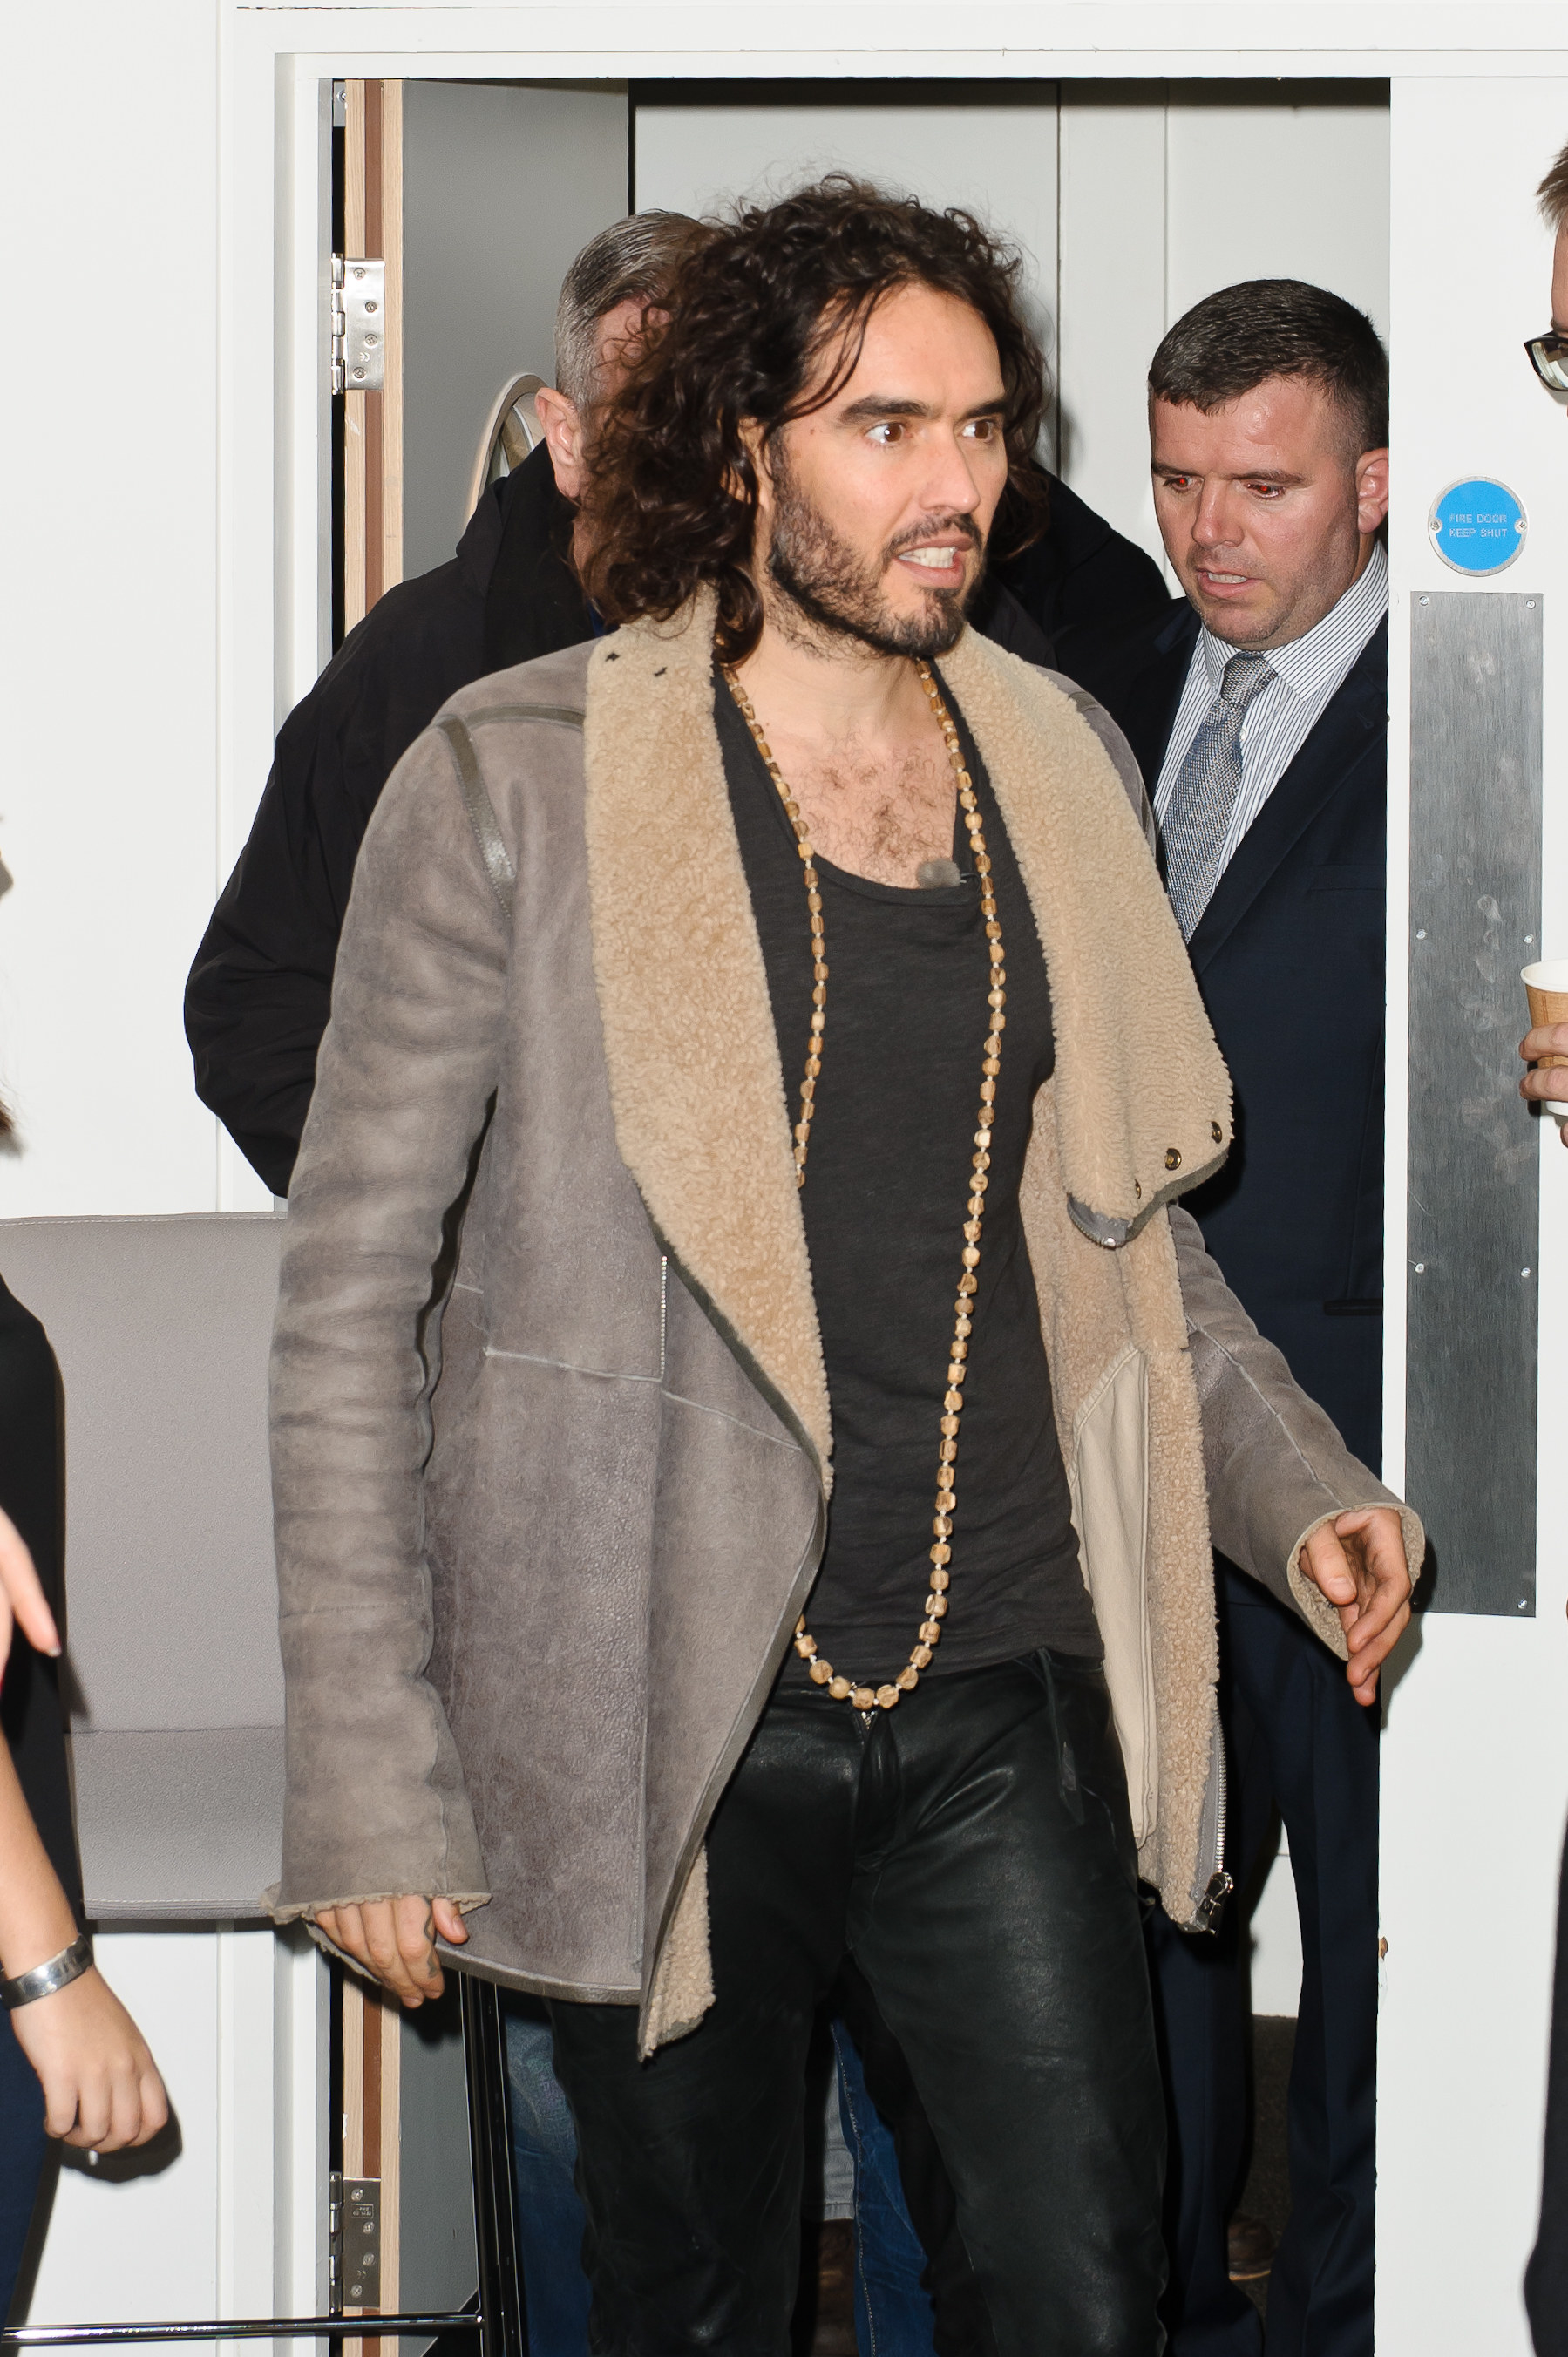 Russell Brand meets fans and signs copies of his book &#x27;Revolution&#x27; at Waterstone